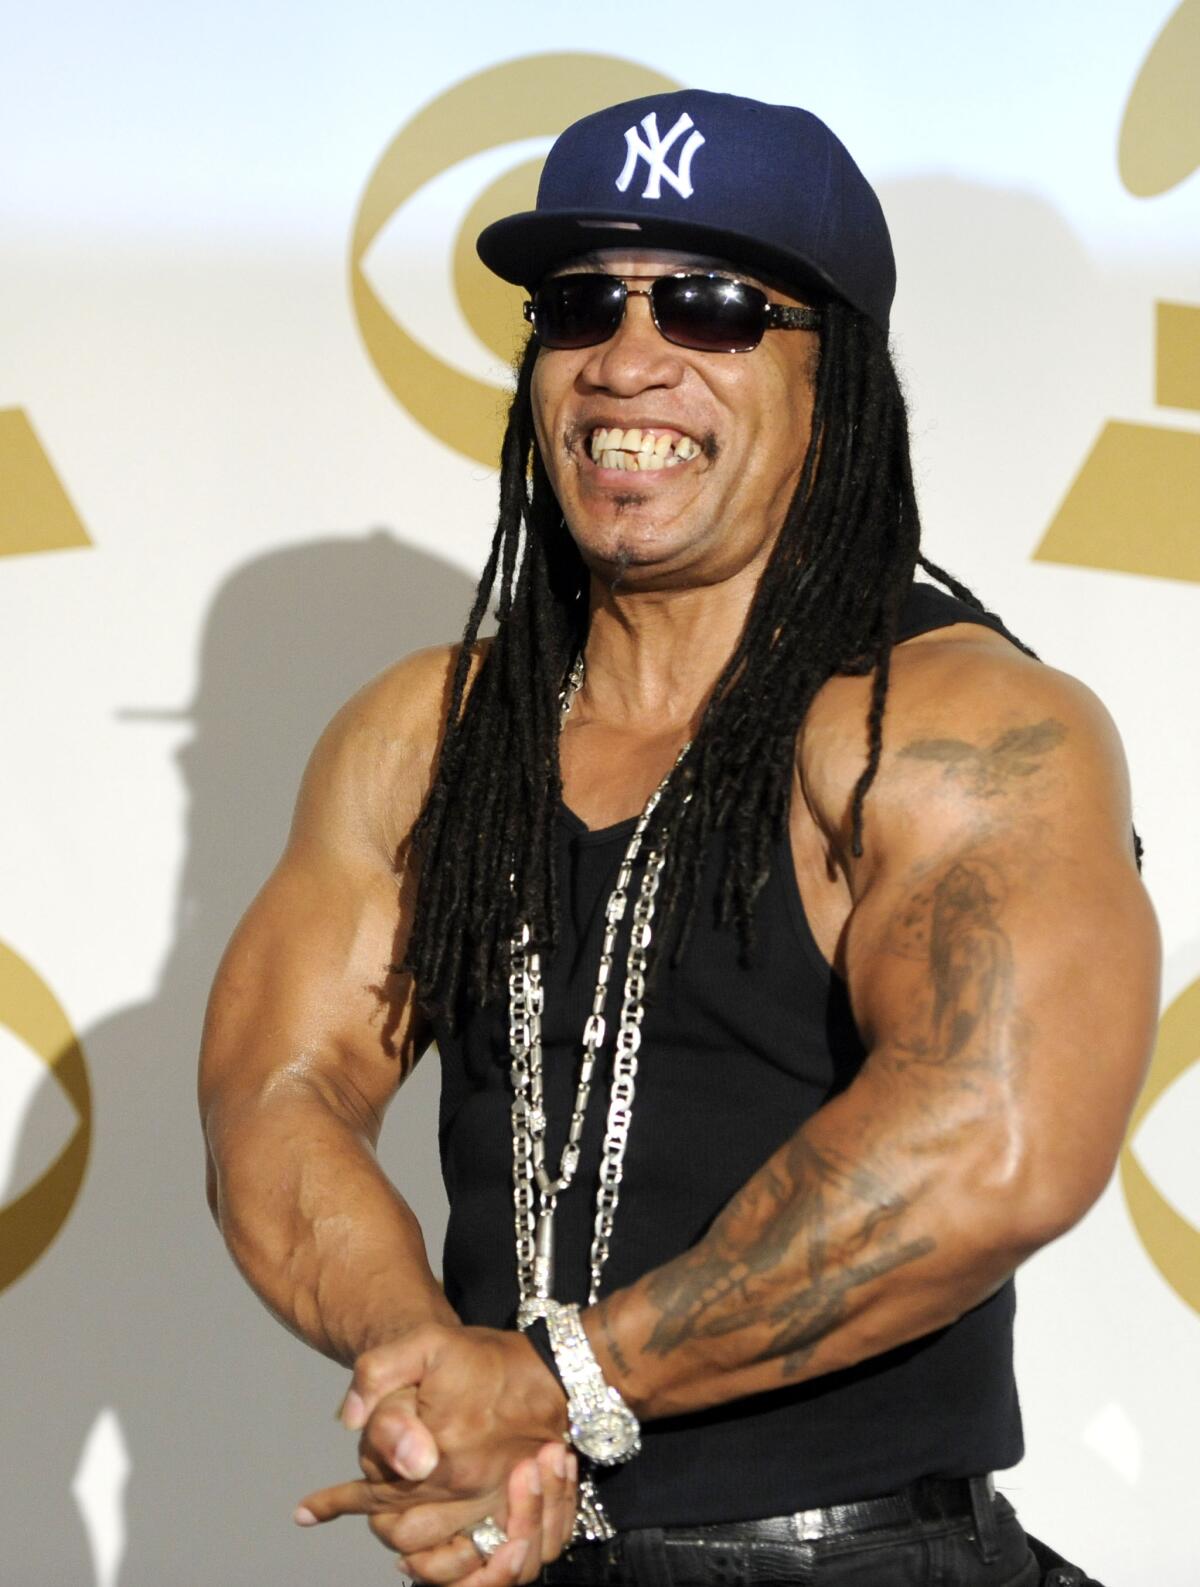 Melle Mel is posing, flexing his arms while wearing a black tank top, silver chains, a Yankees cap and dark sunglasses